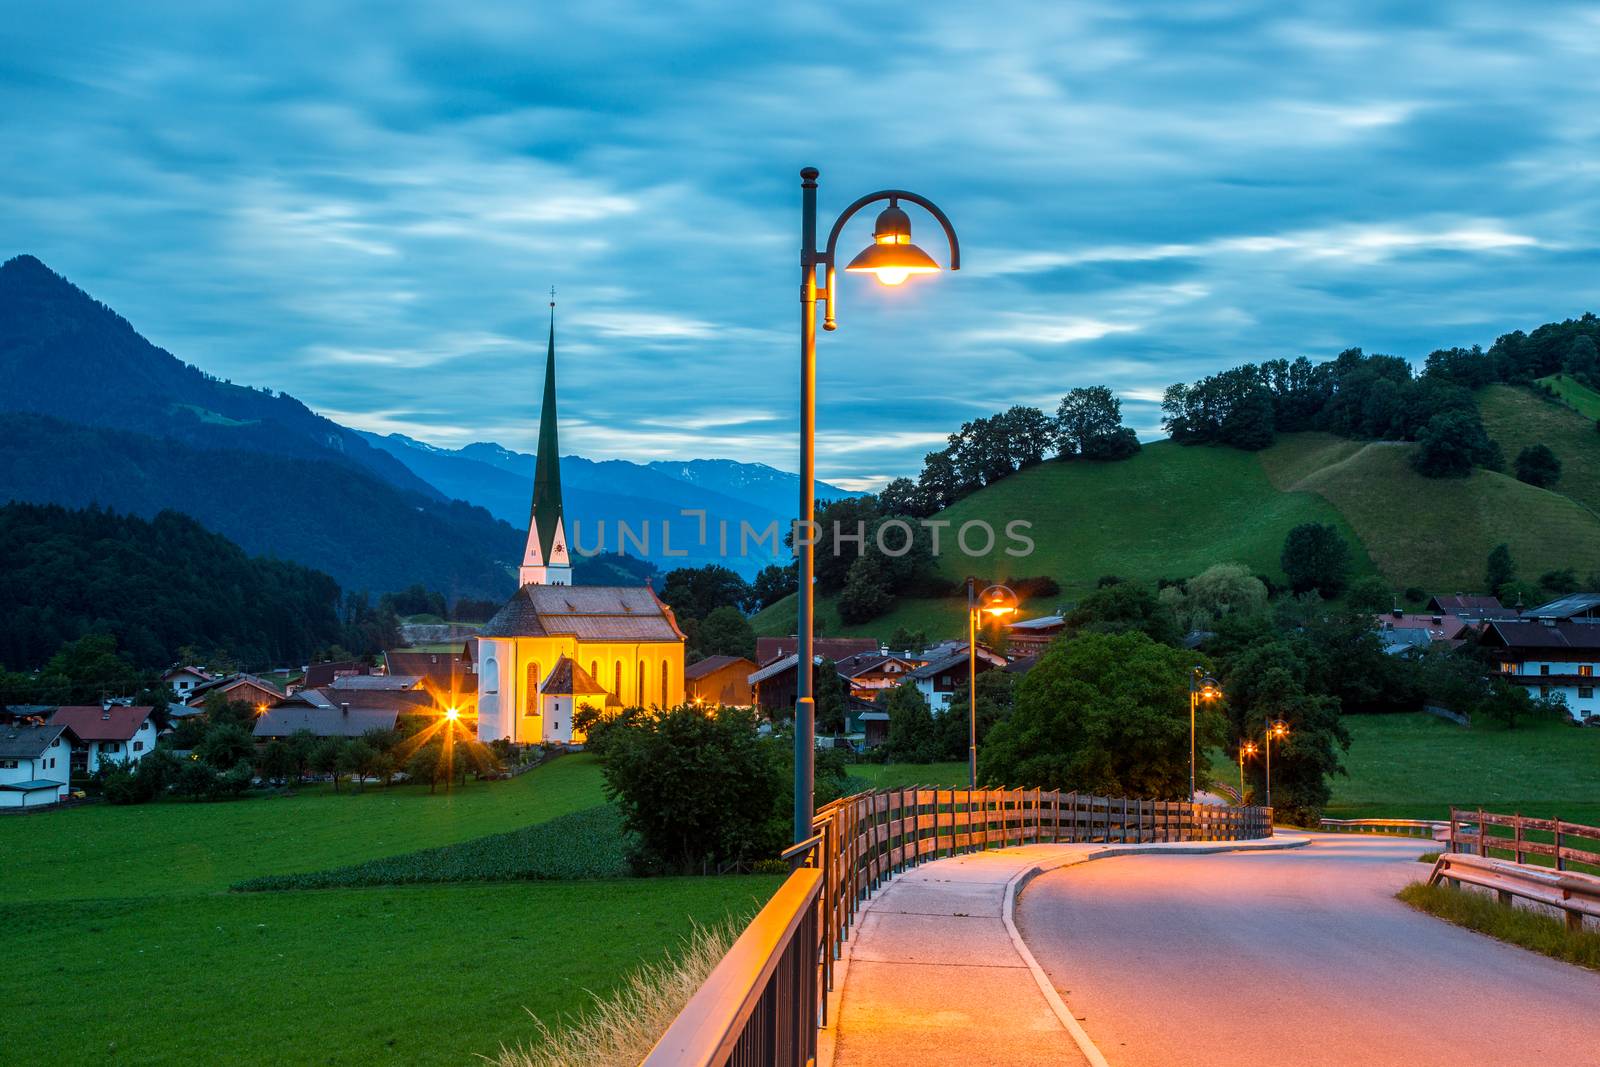 Small old church in mountains Alps Austria